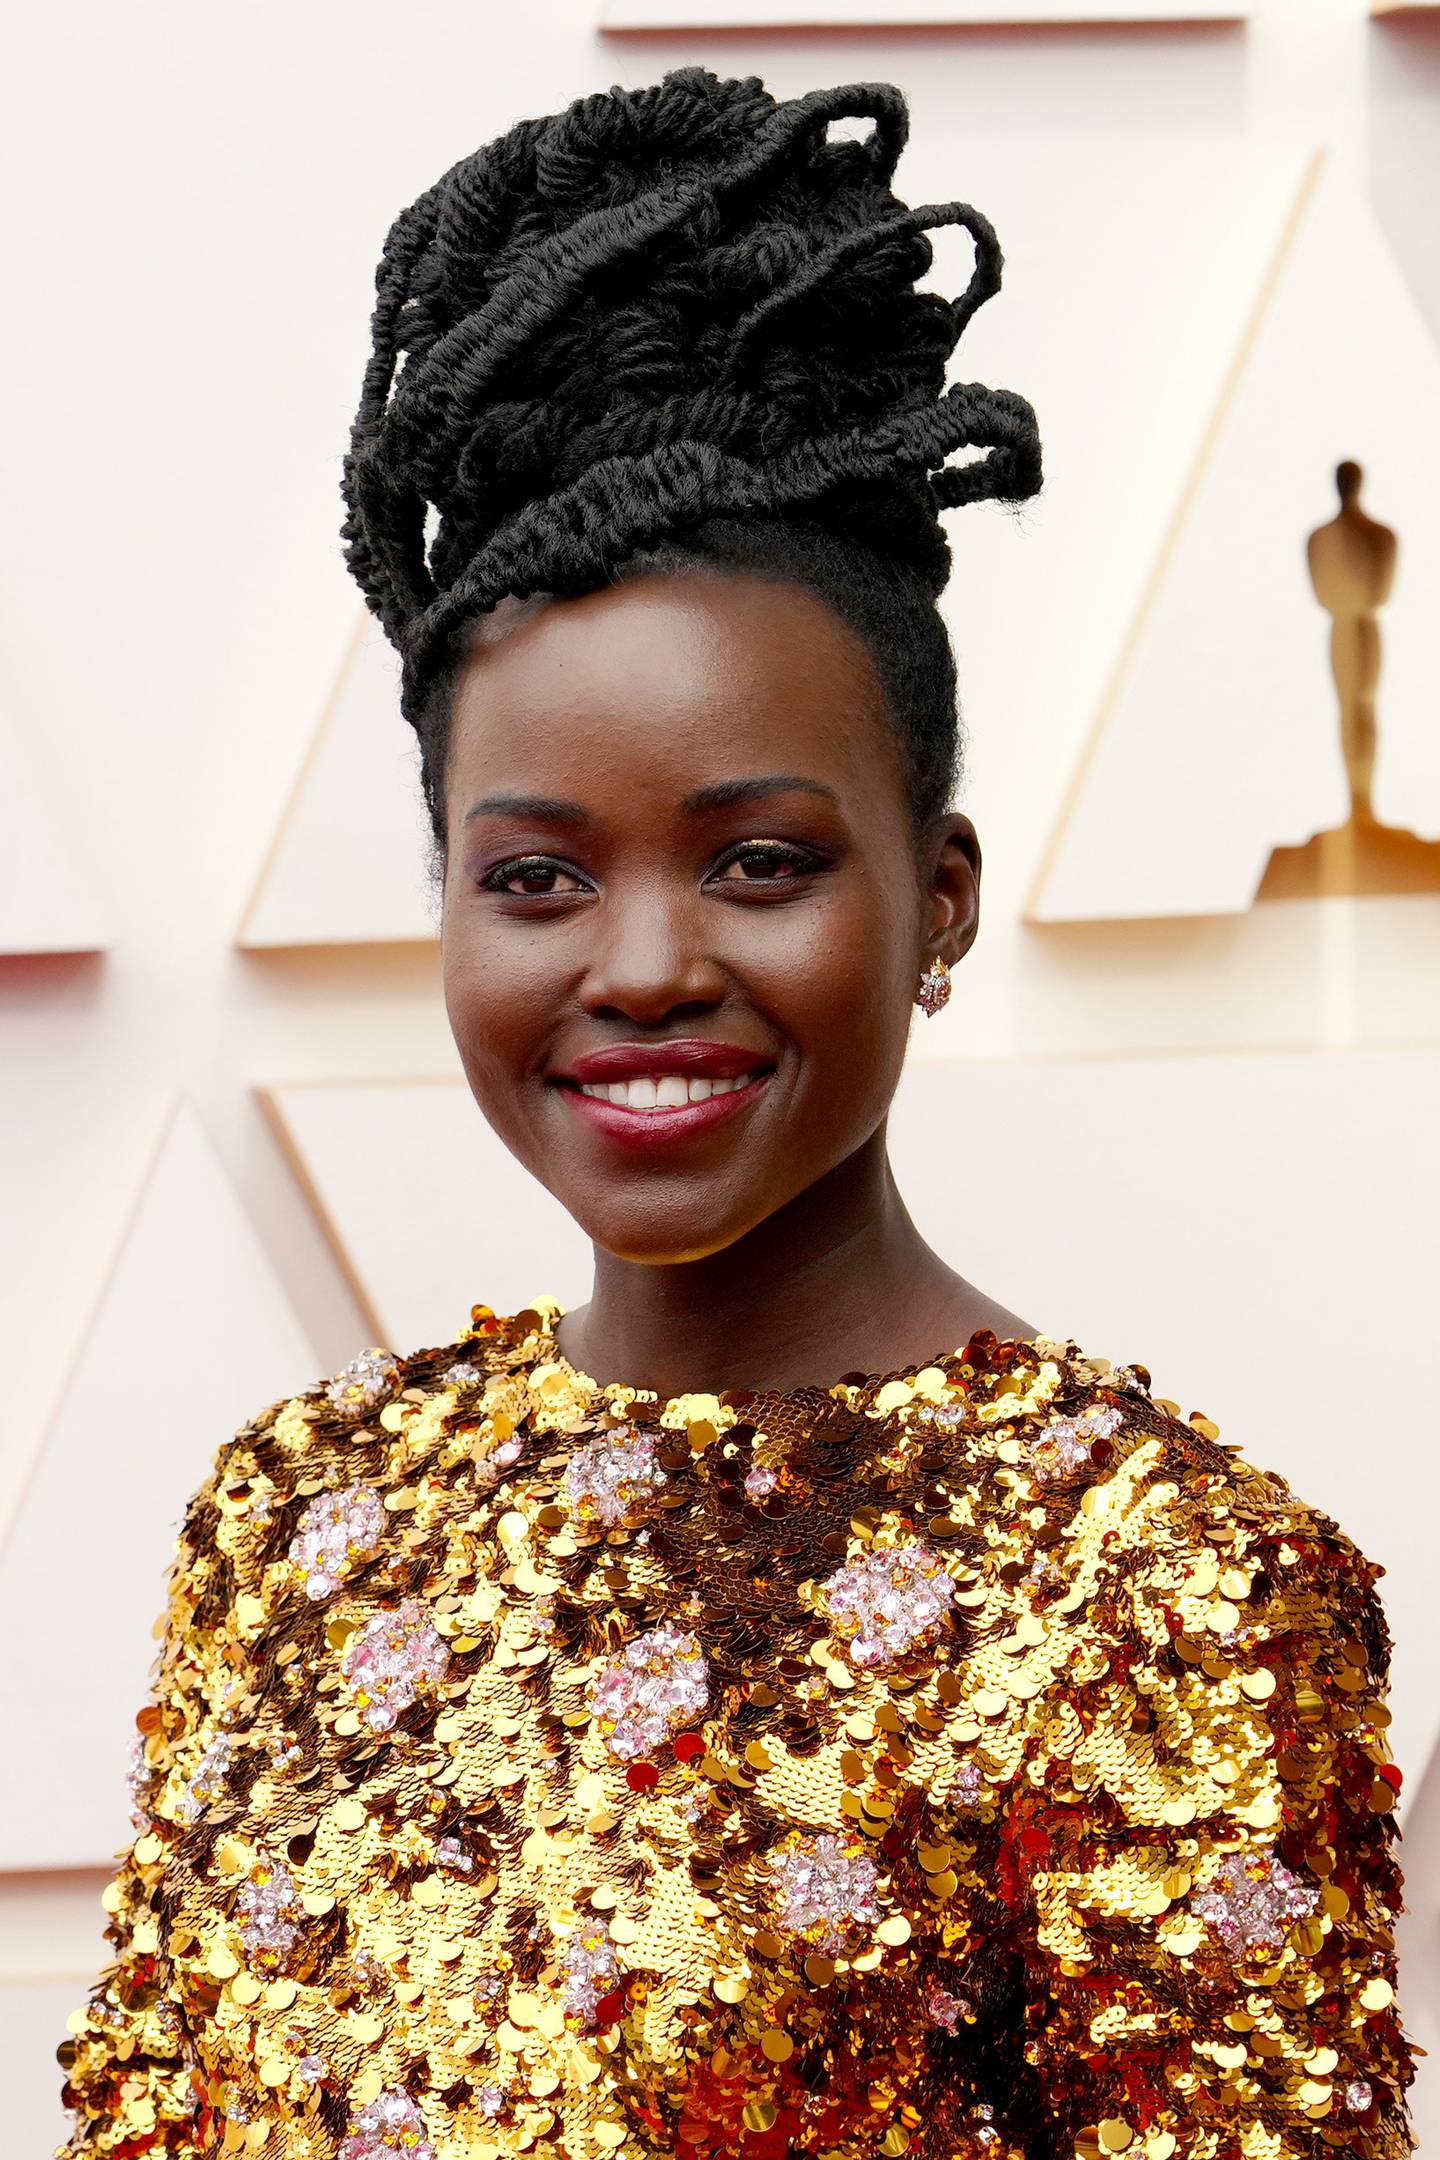 Lupita Nyong'o wore deep red lipstick to compliment her gold dress, at the 2022 Academy Awards. Getty Images 